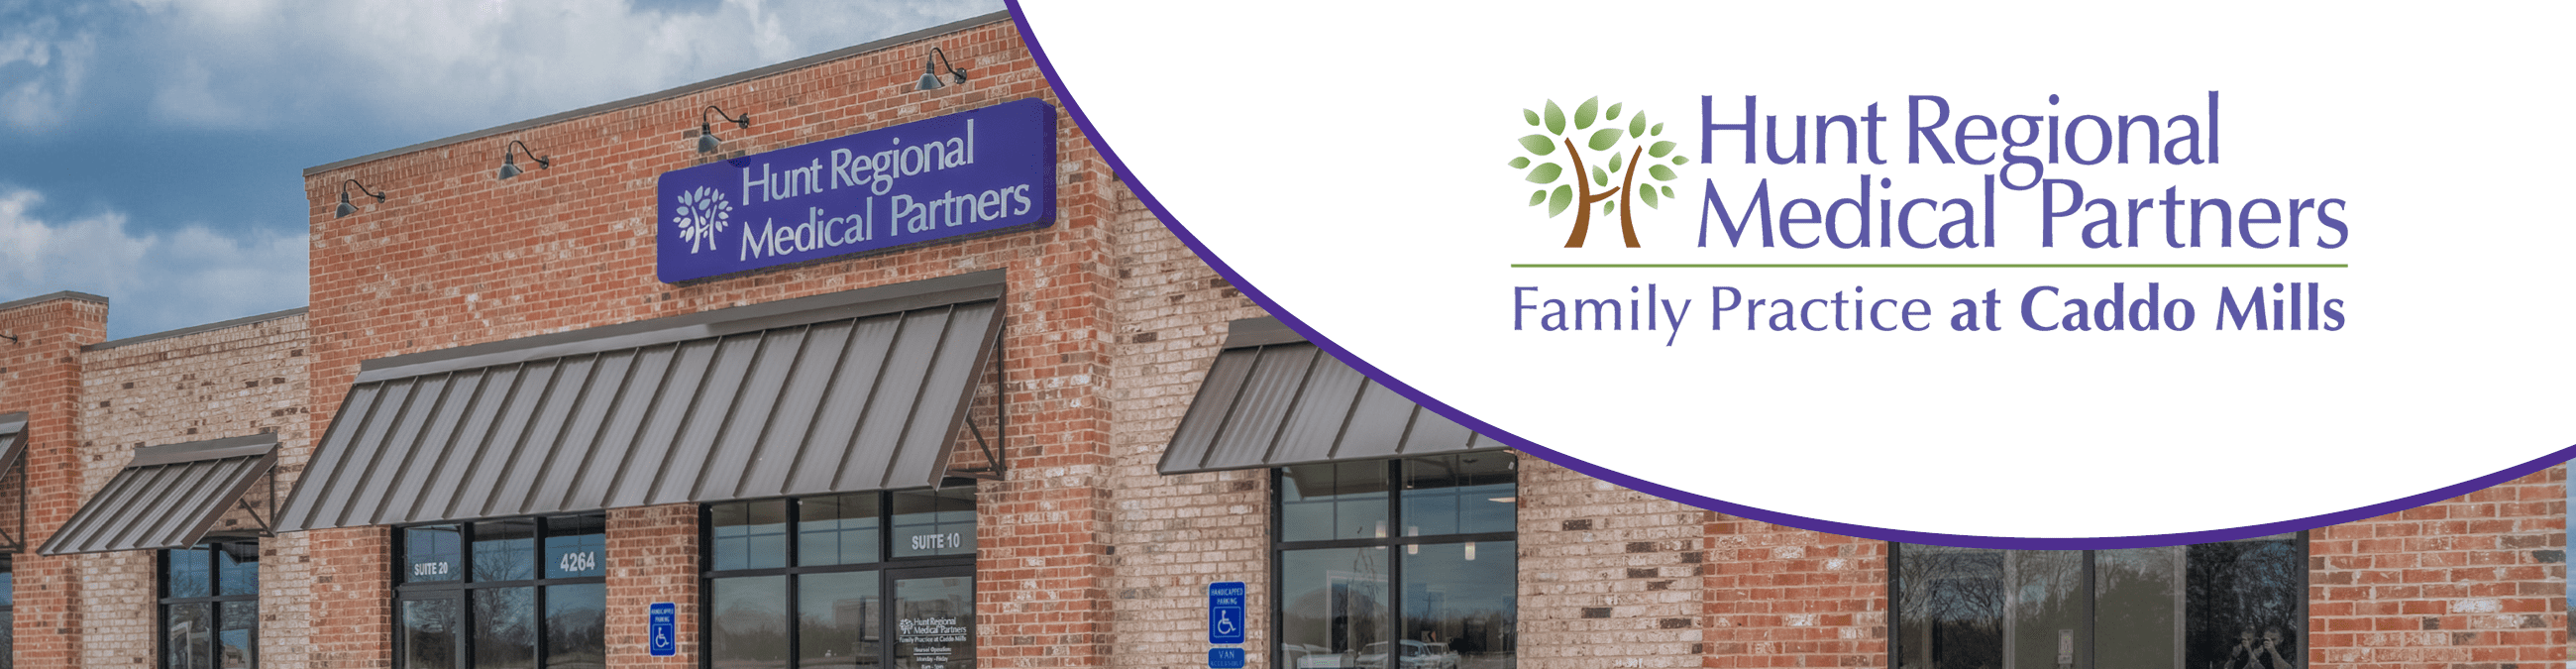 Hunt Regional Medical Partners, Family Practice at Caddo Mills